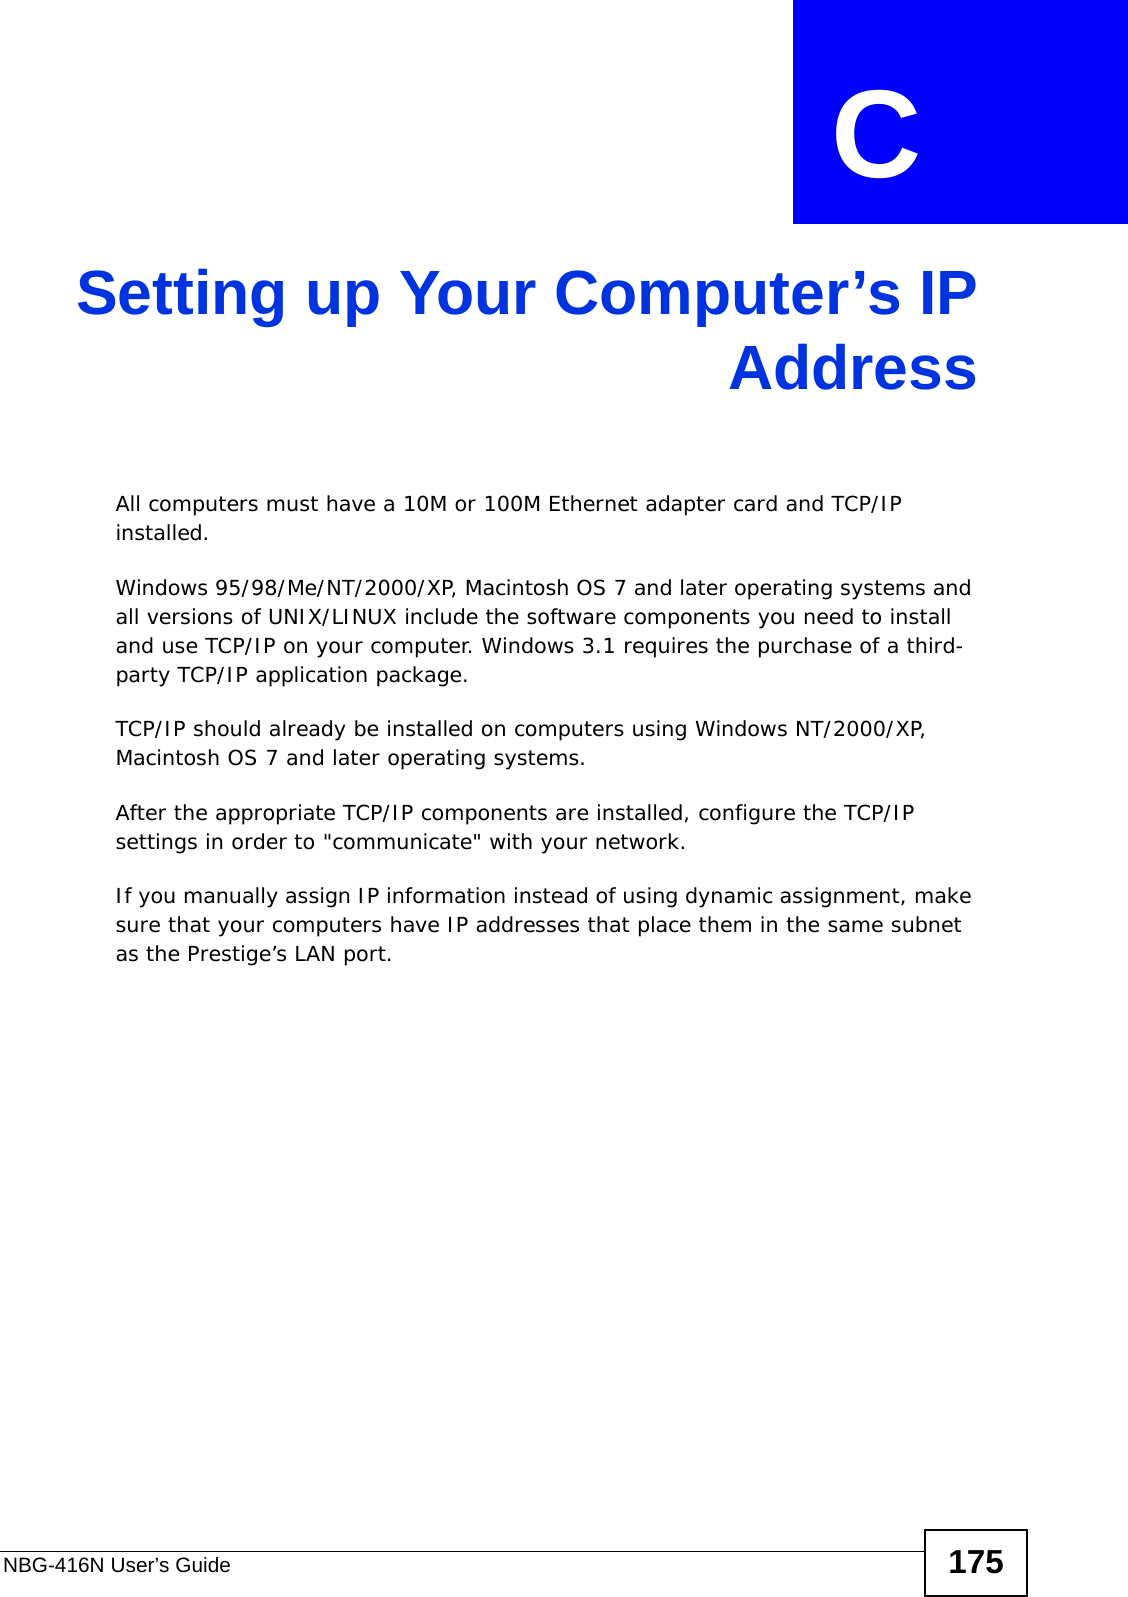 NBG-416N User’s Guide 175APPENDIX  C Setting up Your Computer’s IPAddressAll computers must have a 10M or 100M Ethernet adapter card and TCP/IP installed. Windows 95/98/Me/NT/2000/XP, Macintosh OS 7 and later operating systems and all versions of UNIX/LINUX include the software components you need to install and use TCP/IP on your computer. Windows 3.1 requires the purchase of a third-party TCP/IP application package.TCP/IP should already be installed on computers using Windows NT/2000/XP, Macintosh OS 7 and later operating systems.After the appropriate TCP/IP components are installed, configure the TCP/IP settings in order to &quot;communicate&quot; with your network. If you manually assign IP information instead of using dynamic assignment, make sure that your computers have IP addresses that place them in the same subnet as the Prestige’s LAN port.